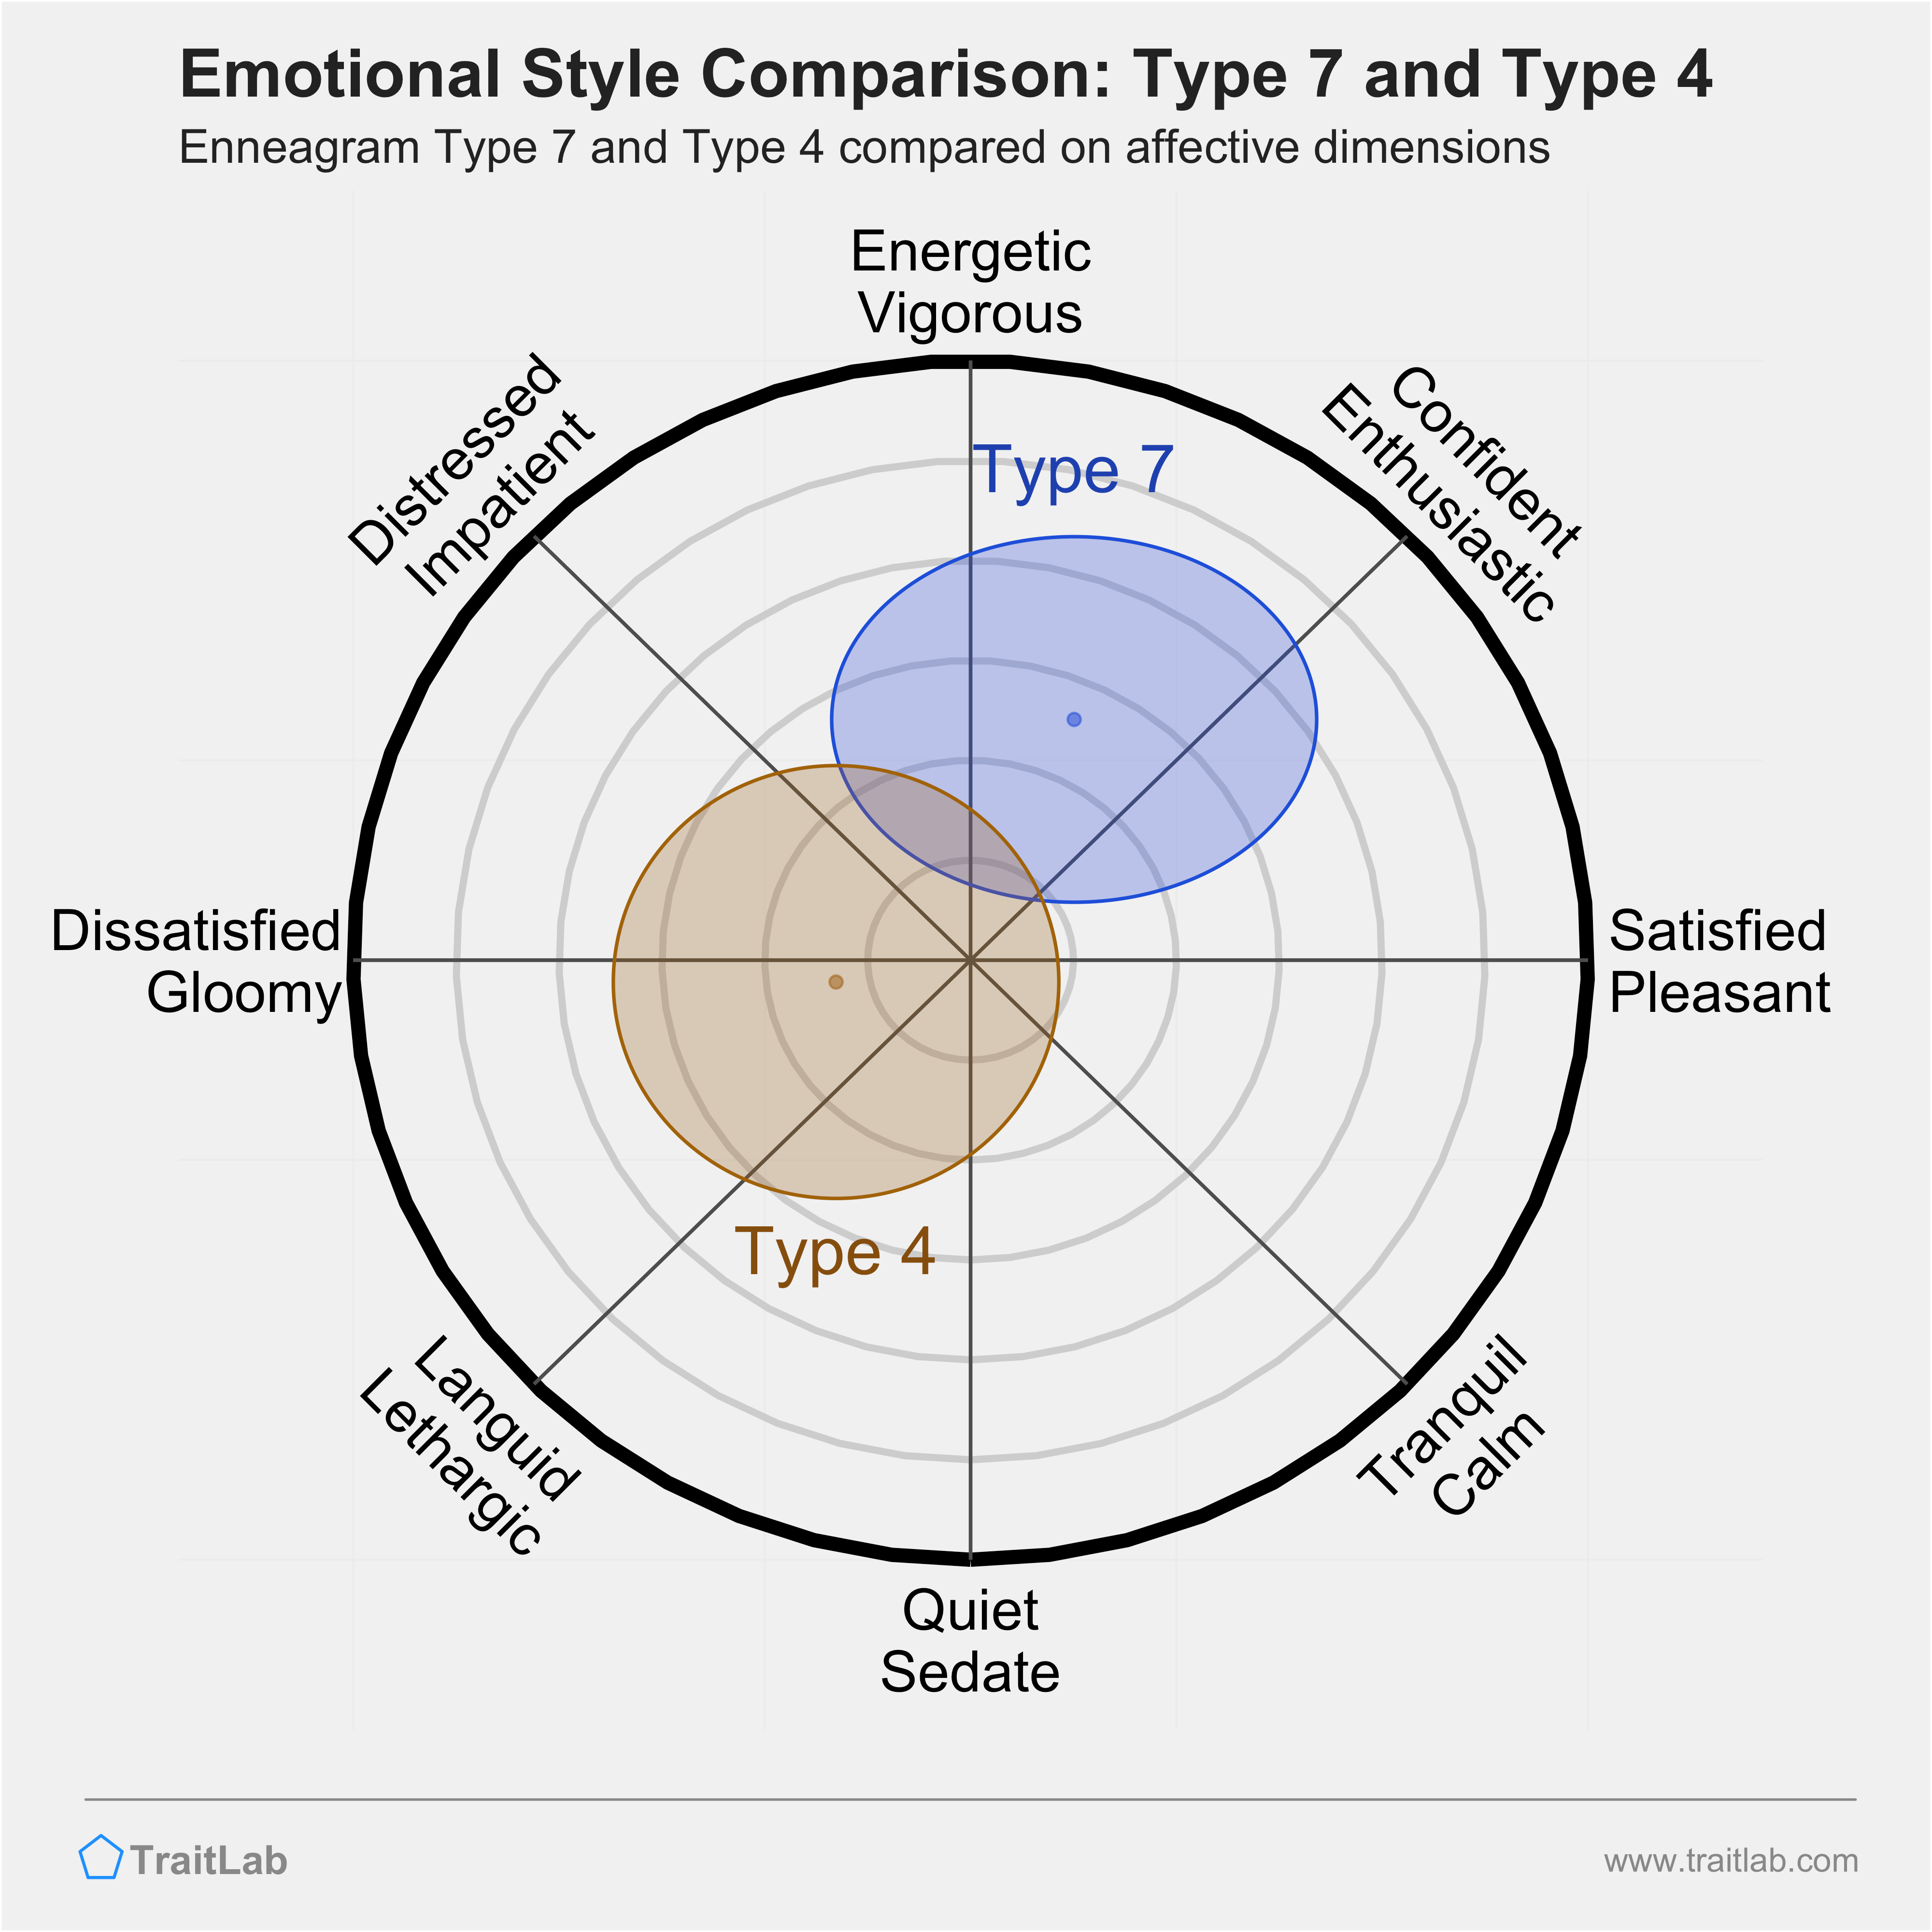 Type 7 and Type 4 comparison across emotional (affective) dimensions